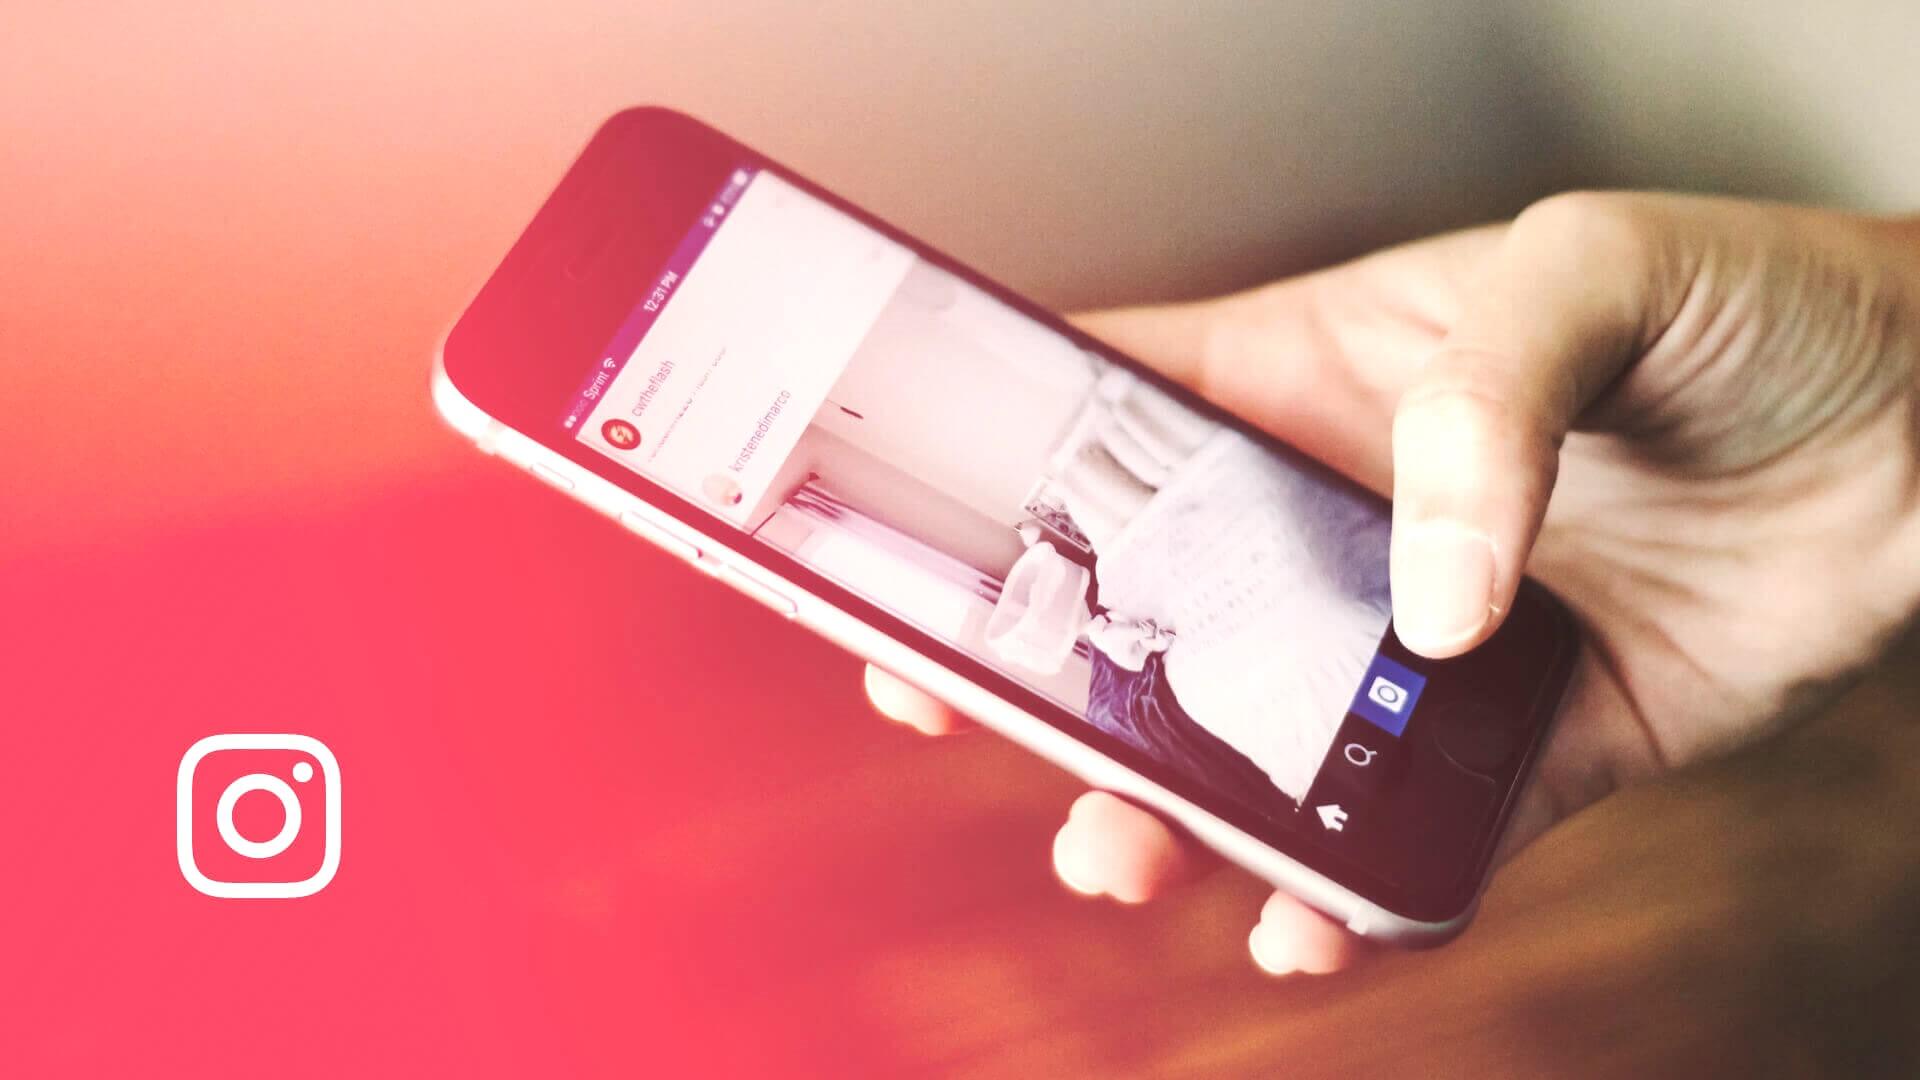 Want to Market on Instagram? Find the Right Audience - Instagram City